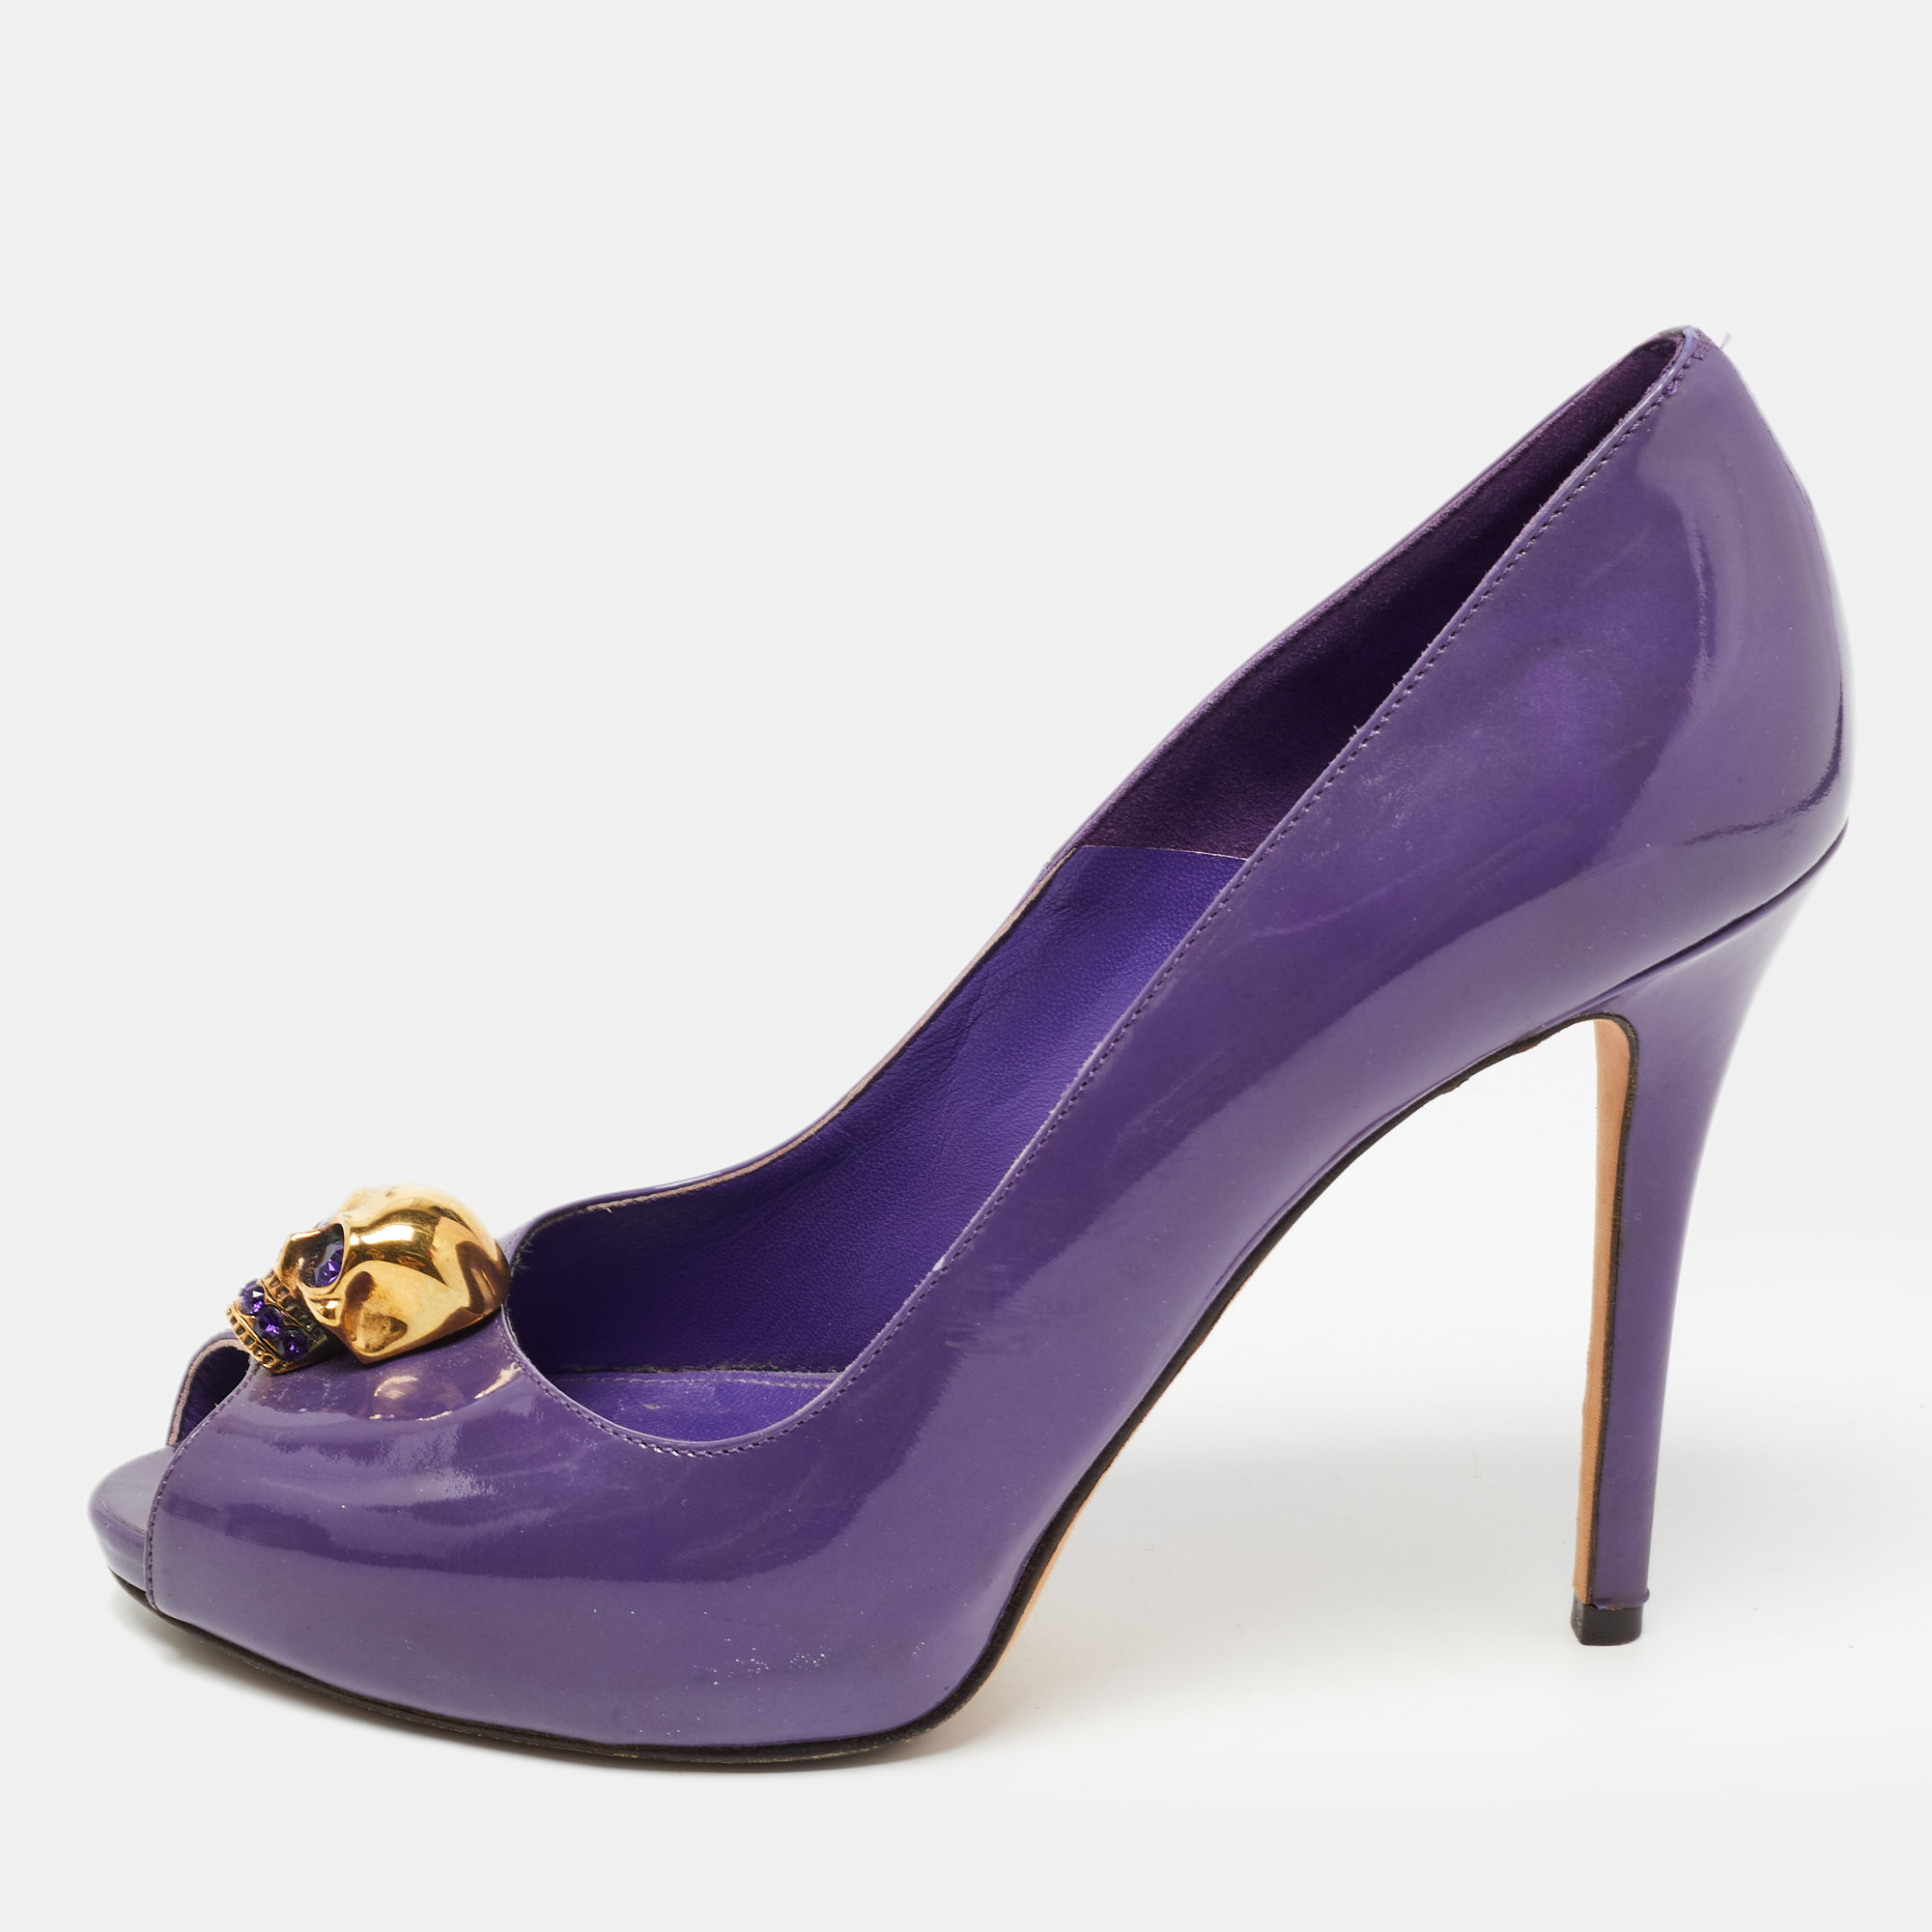 Pre-owned Alexander Mcqueen Purple Patent Leather Crystal Embellished Skull Peep Toe Pumps Size 38